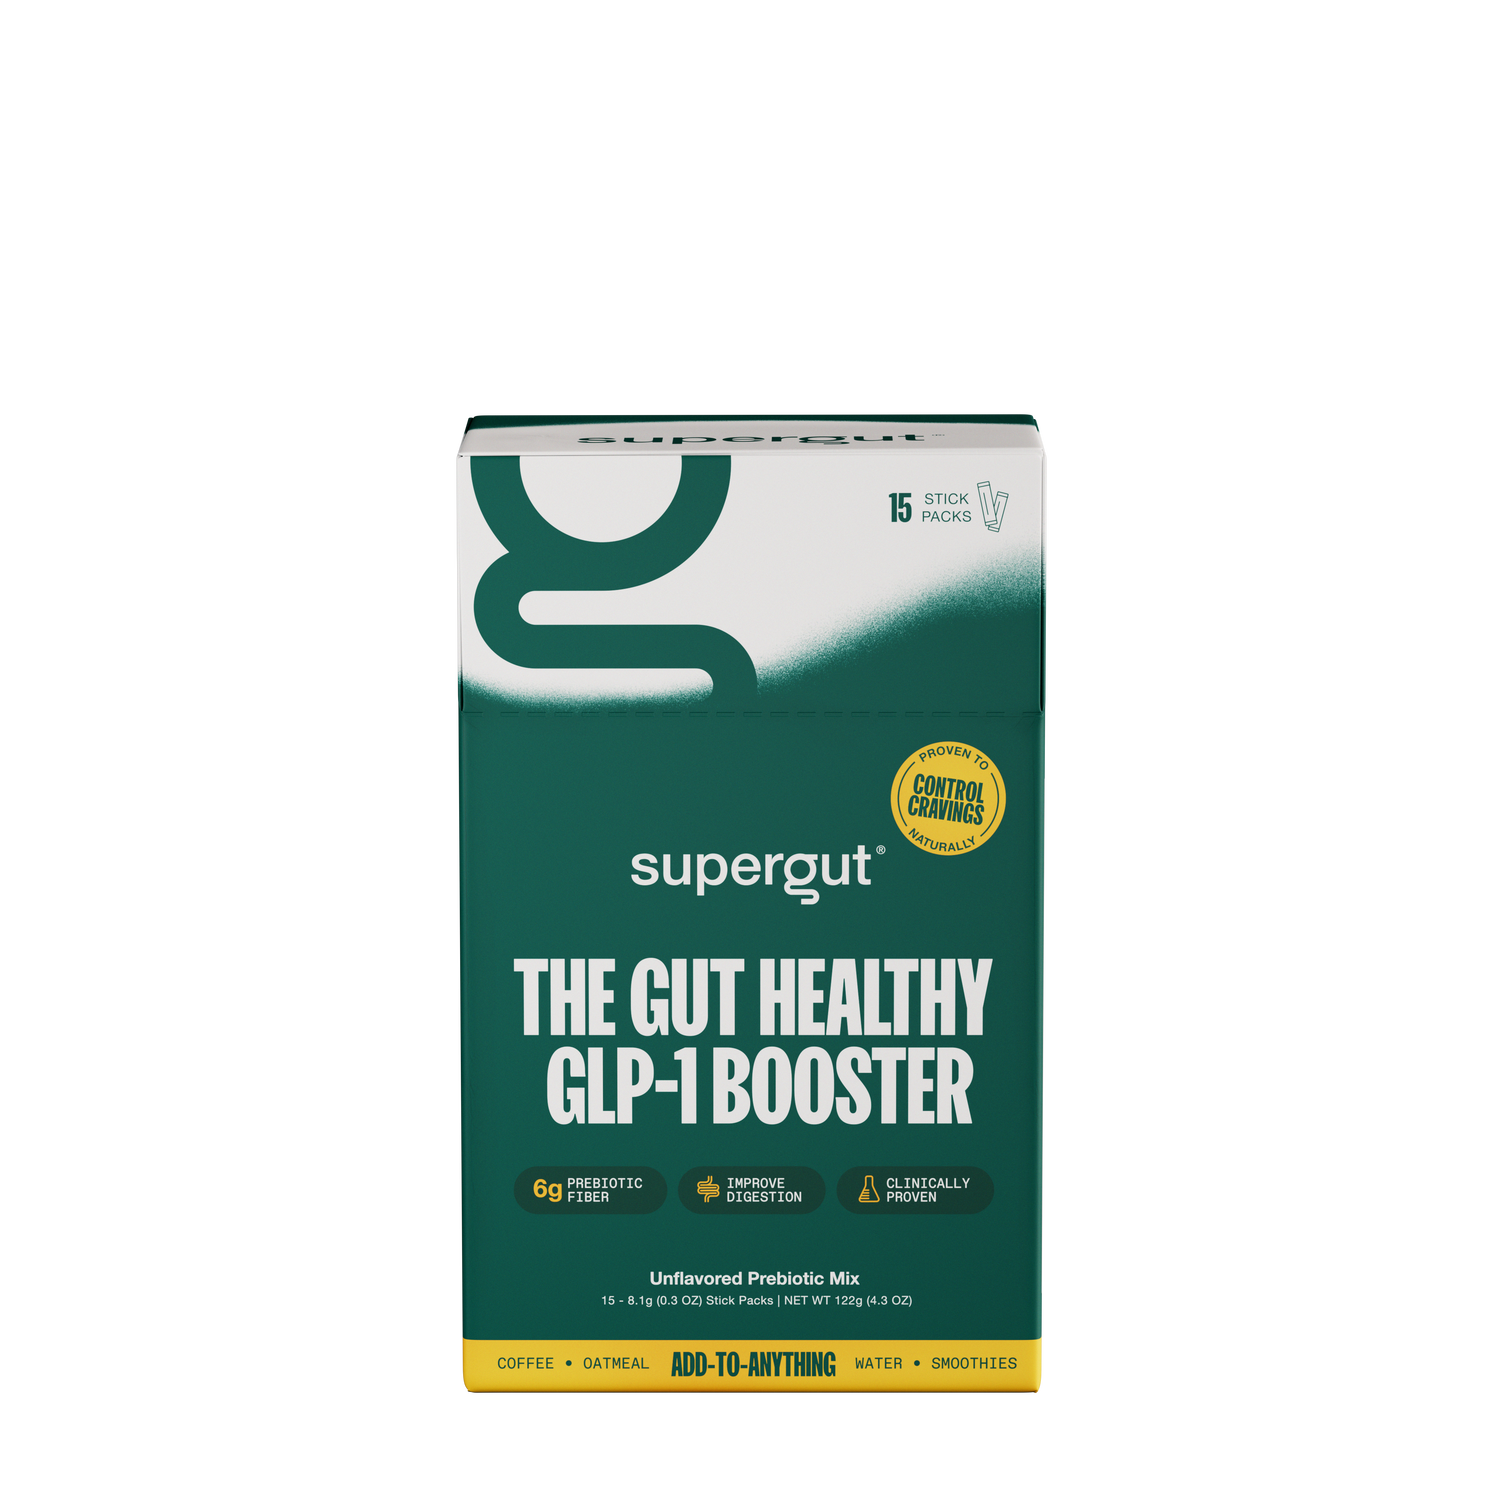 Supergut the Gut Healthly Glp-1 Booster - Unflavored - 0.3 Oz. (15 Servings)